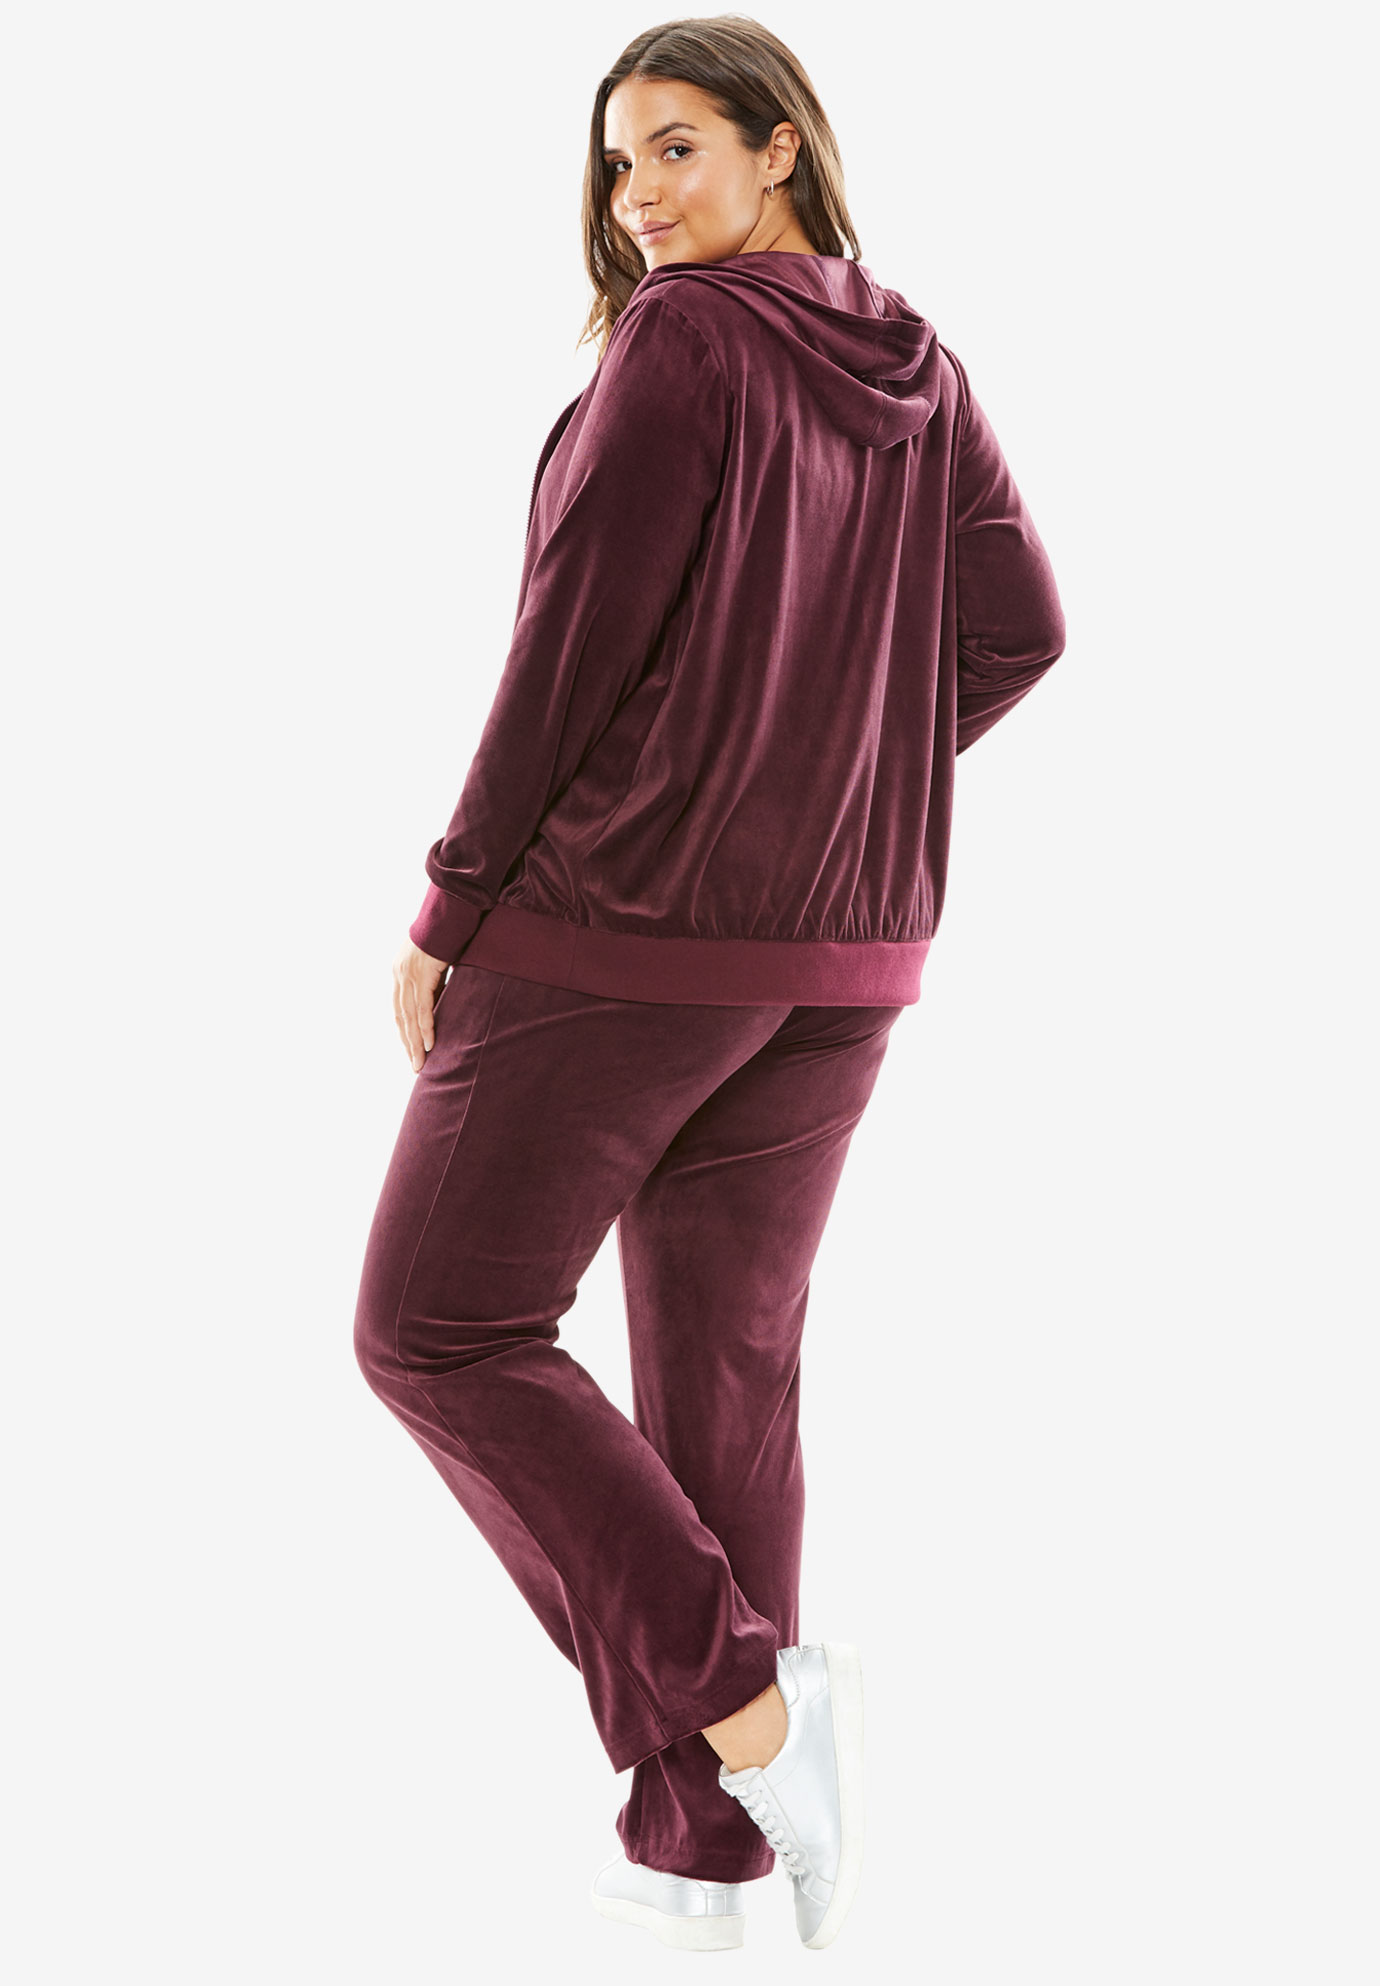 Woman Within Women's Plus Size 2-Piece Velour Hoodie Set Sweatsuit - image 3 of 5